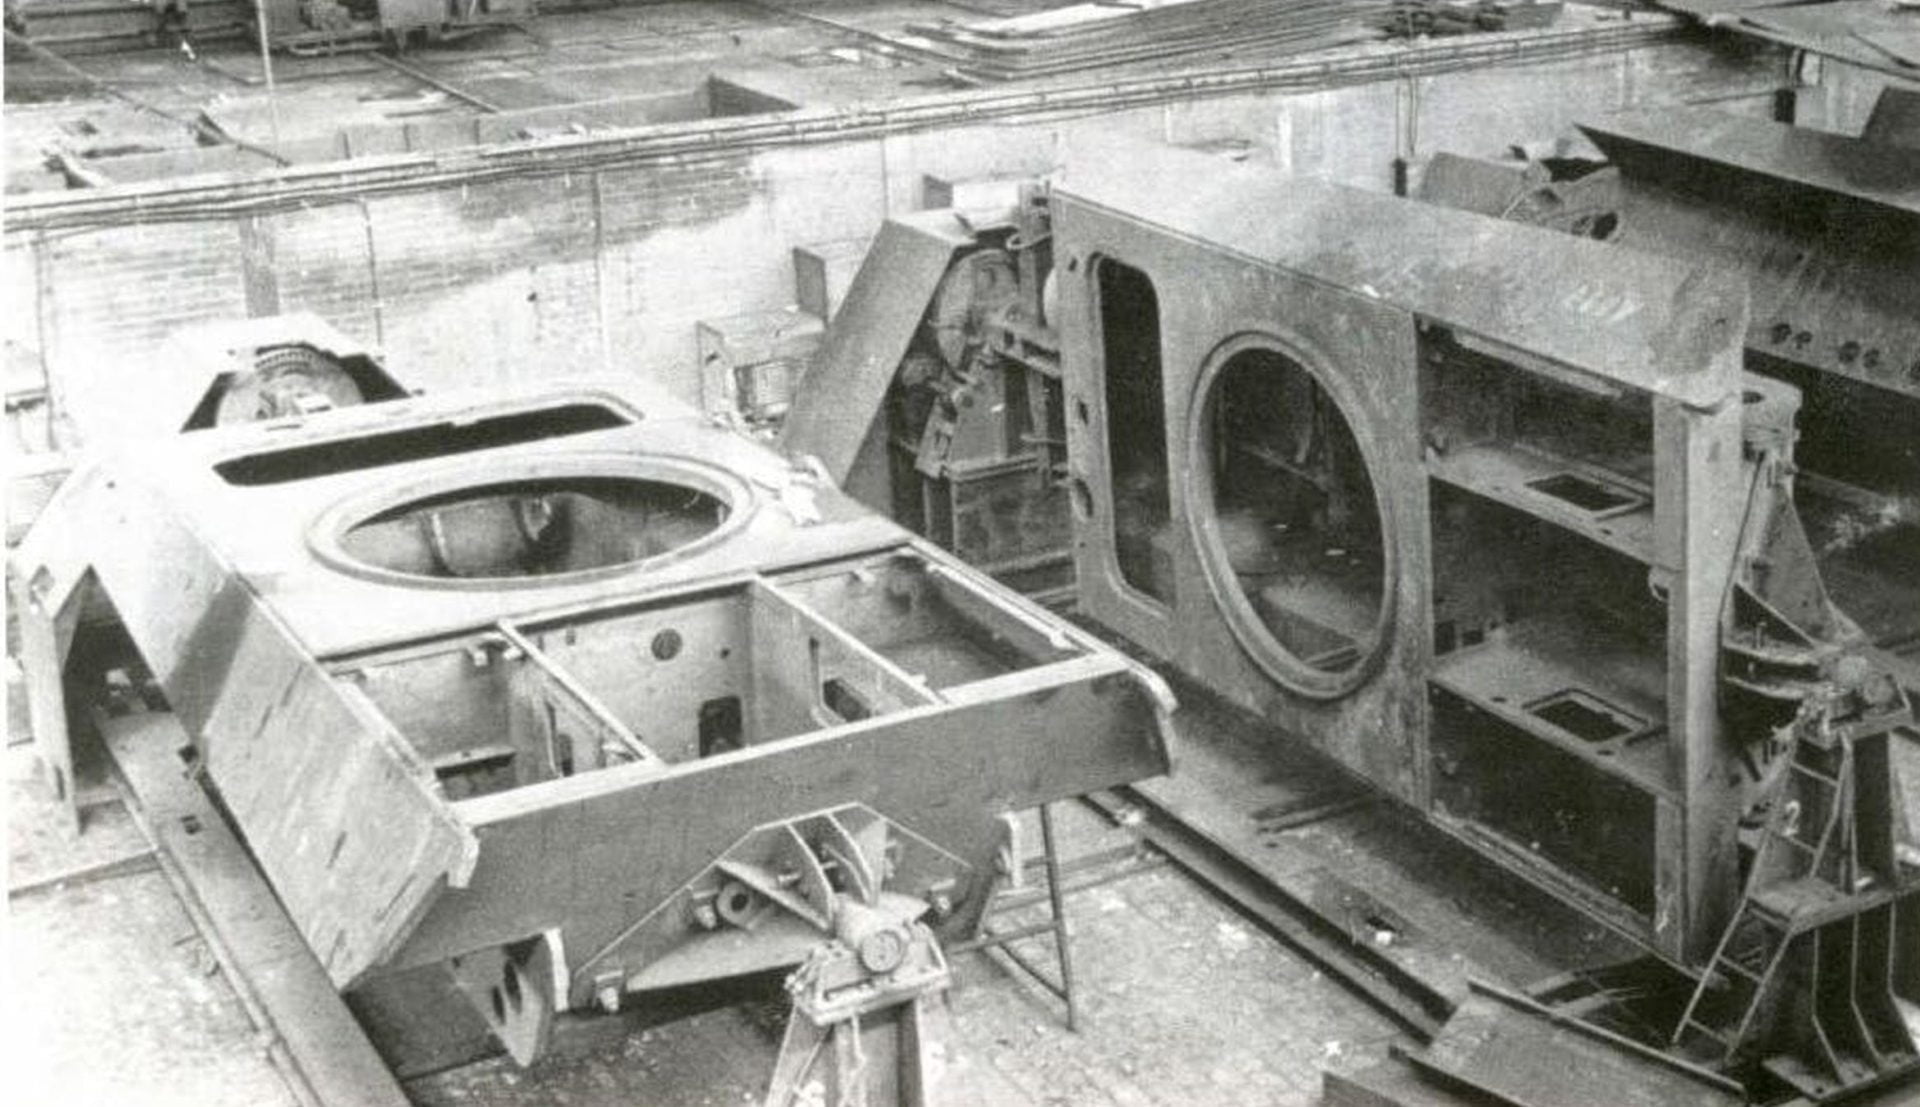 Unfinished Panther hulls in Ruhrstahl. <a href="https://www.armedconflicts.com/attachments/796/ruhrstahl2.jpg" rel="nofollow">Source</a>